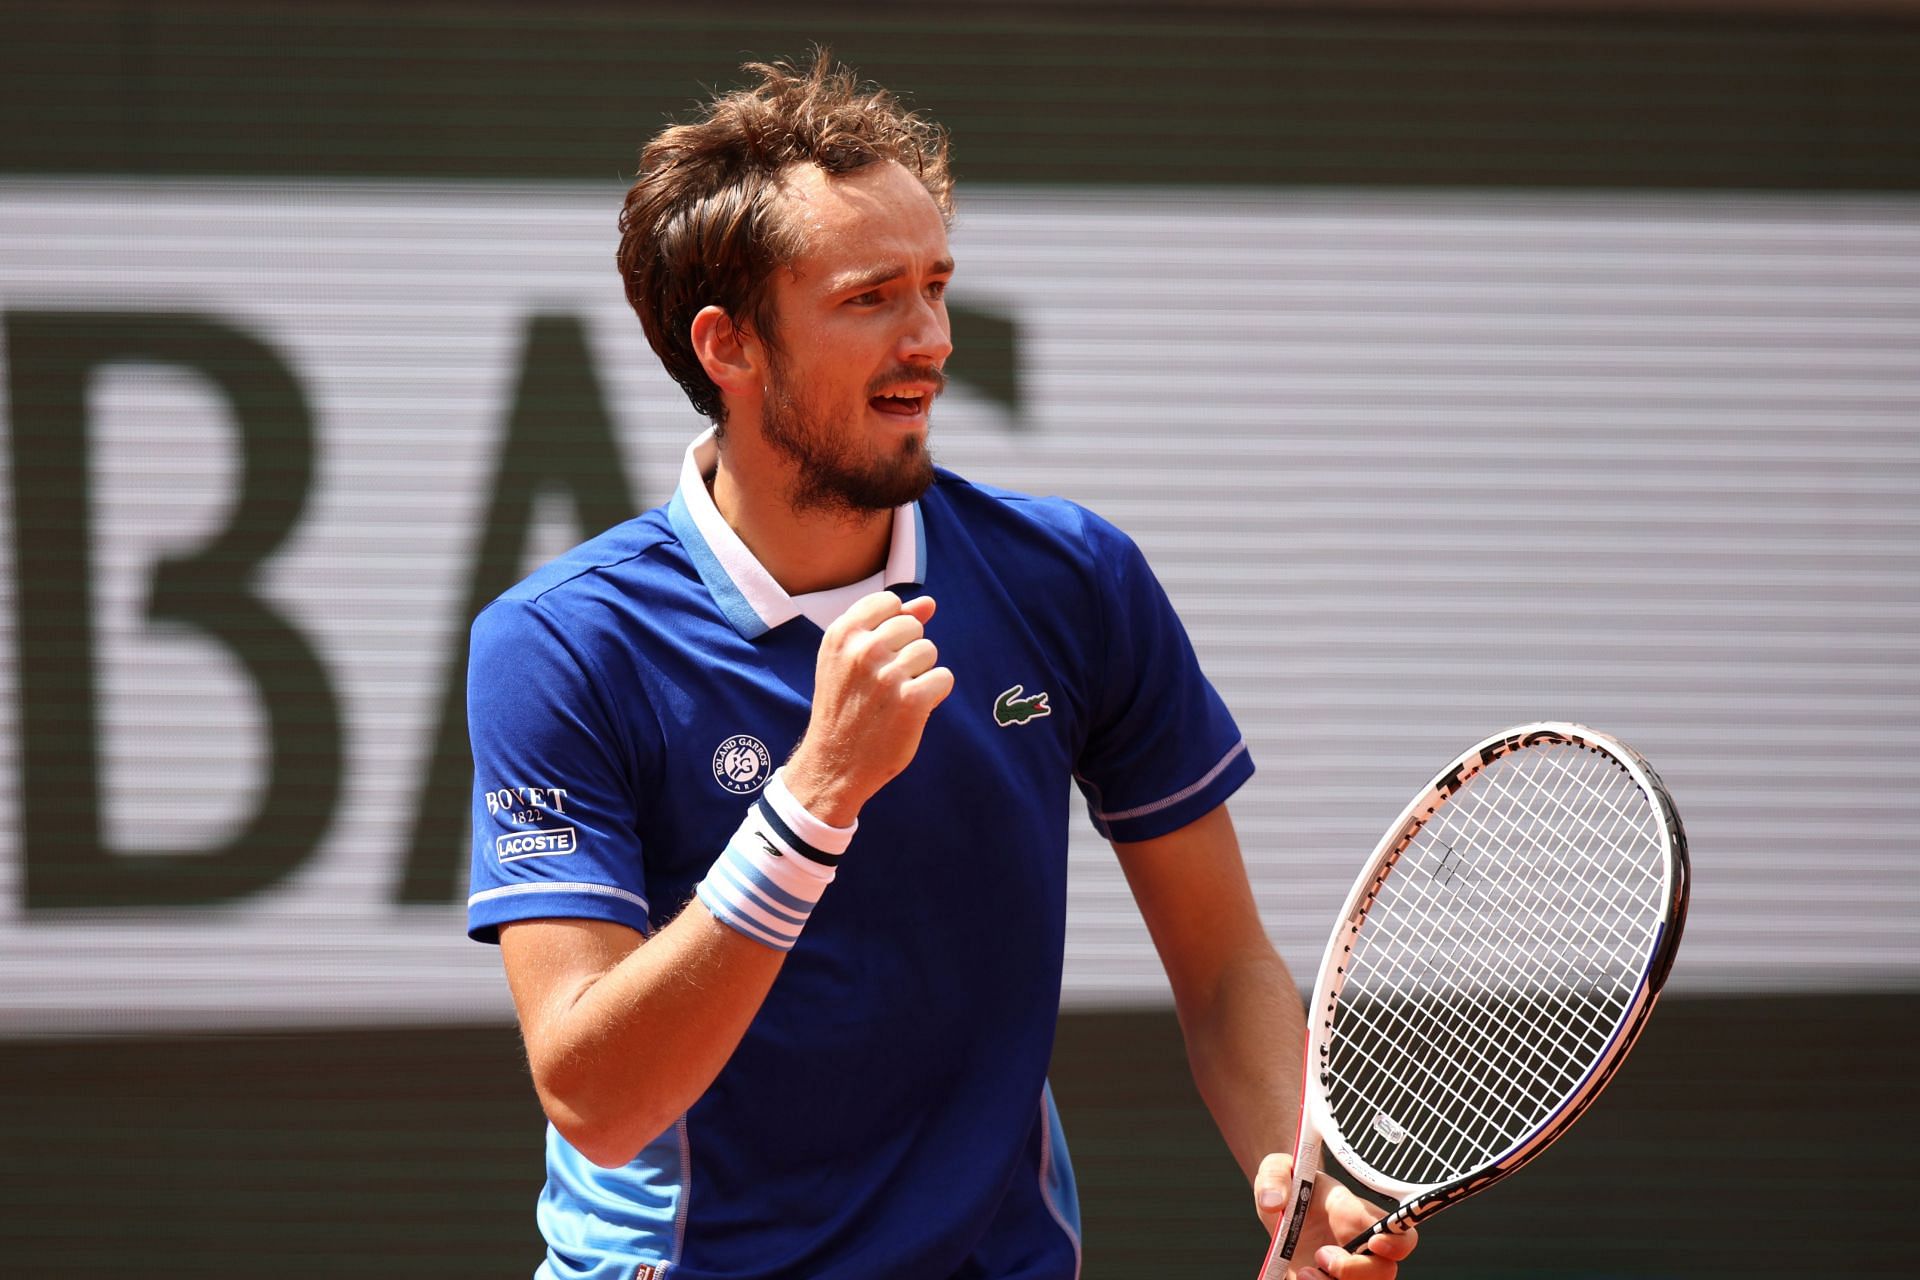 Daniil Medvedev is the defending champion at the Mallorca Open.